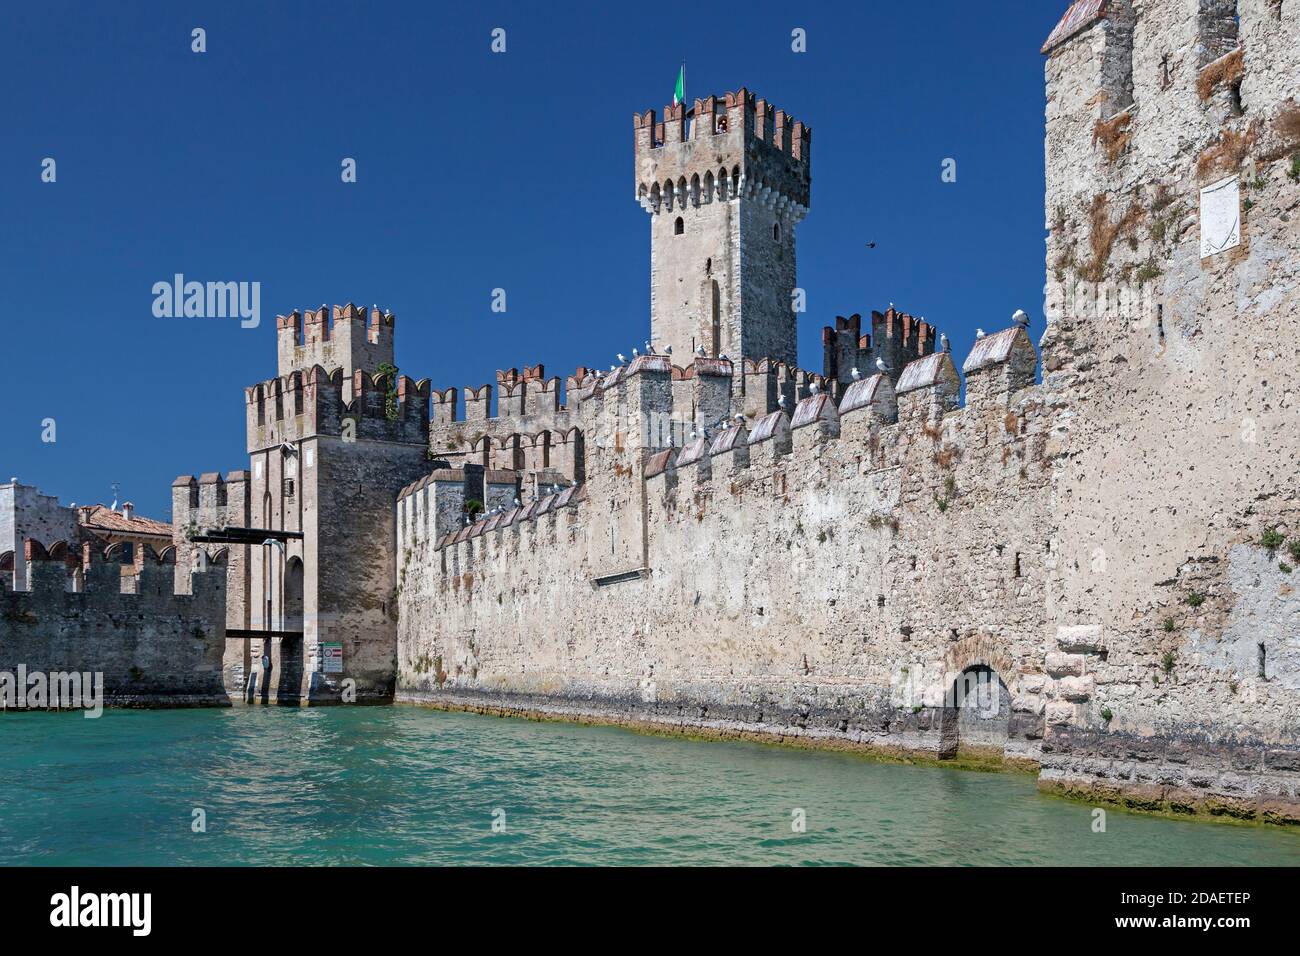 Geographie / Reisen, Italien, Lombardei, Sirmione, Gardasee, Castello Scaligero in Sirmione, Gardasee, Additional-Rights-Clearance-Info-not-available Stockfoto